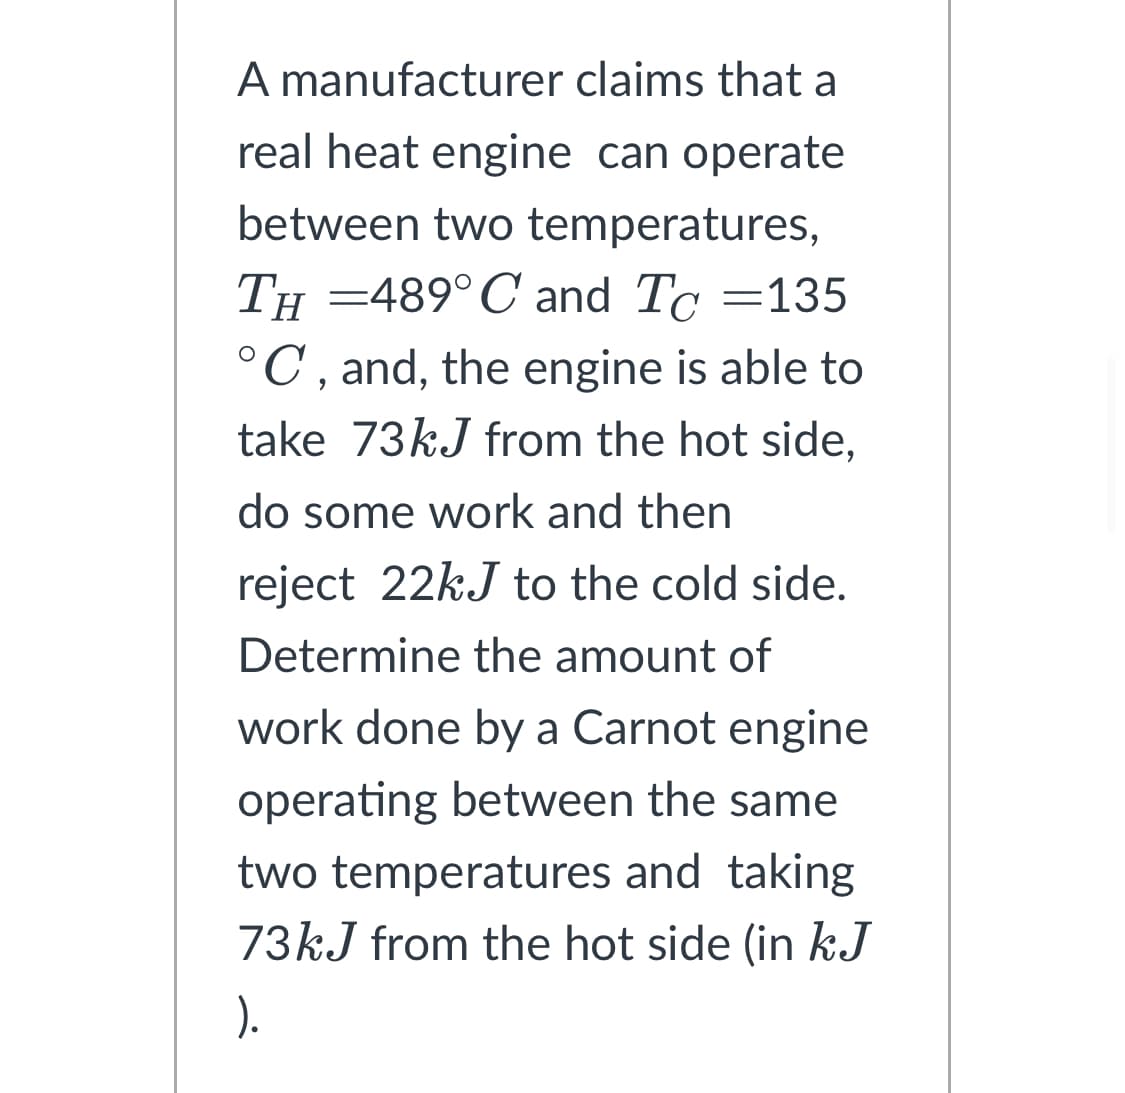 A manufacturer claims that a
real heat engine can operate
between two temperatures,
TH=489° C and To=135
°C, and, the engine is able to
take 73kJ from the hot side,
do some work and then
reject 22kJ to the cold side.
Determine the amount of
work done by a Carnot engine
operating between the same
two temperatures and taking
73kJ from the hot side (in kJ
).